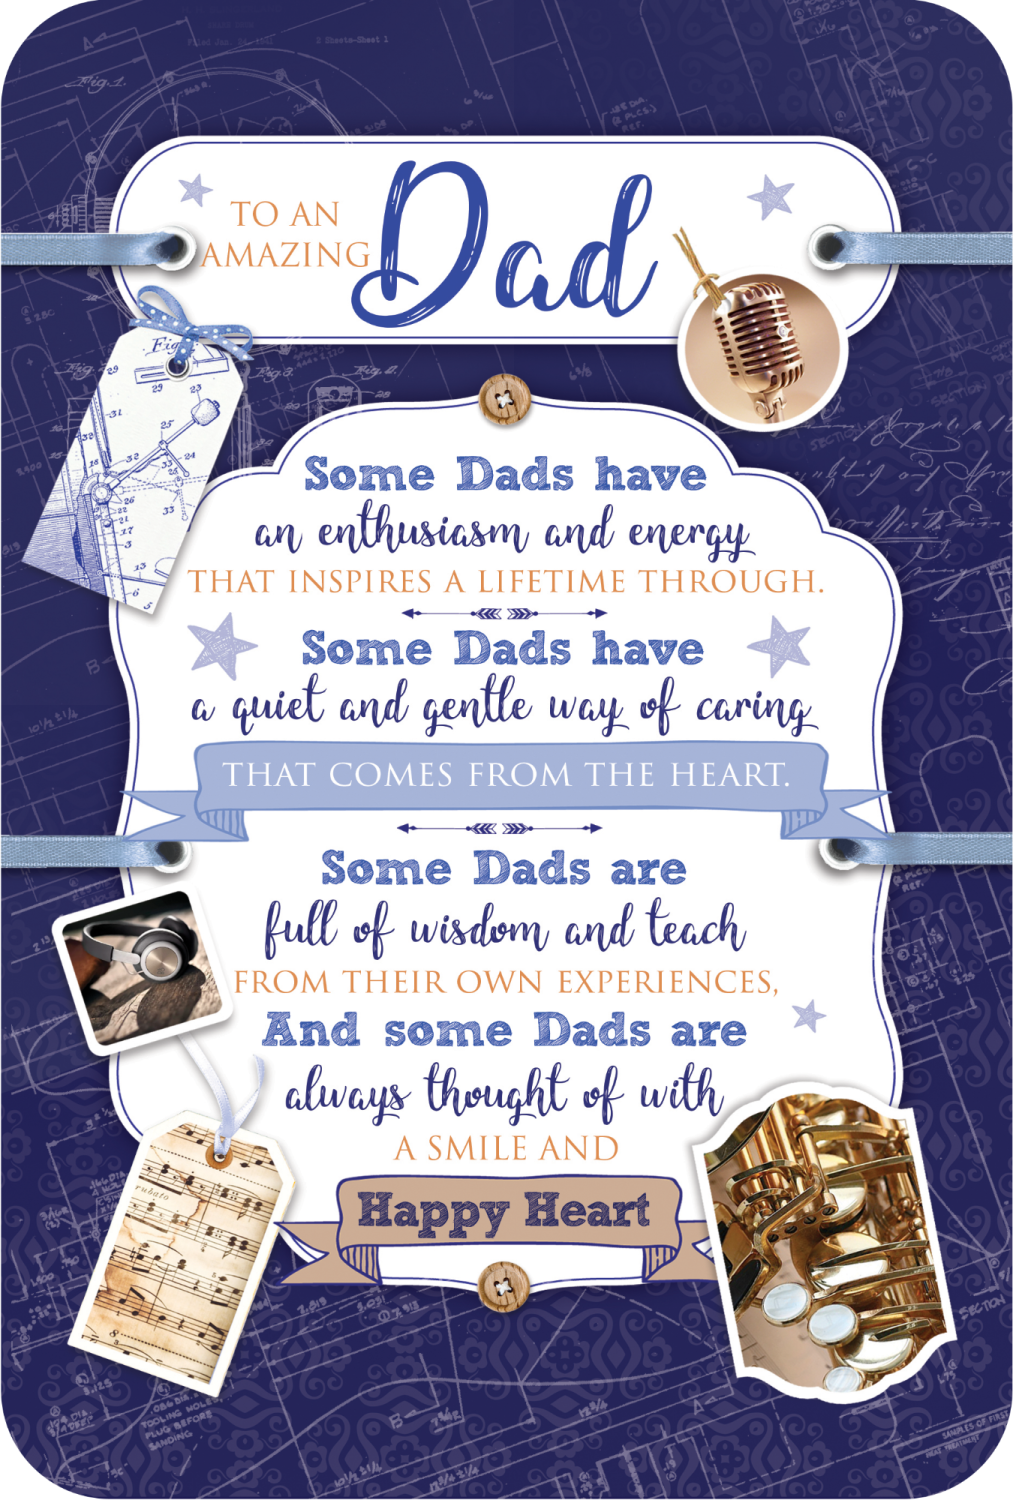 Amazing Dad Birthday Card - ALWAYS Thought Of With A SMILE & Happy HEART - 